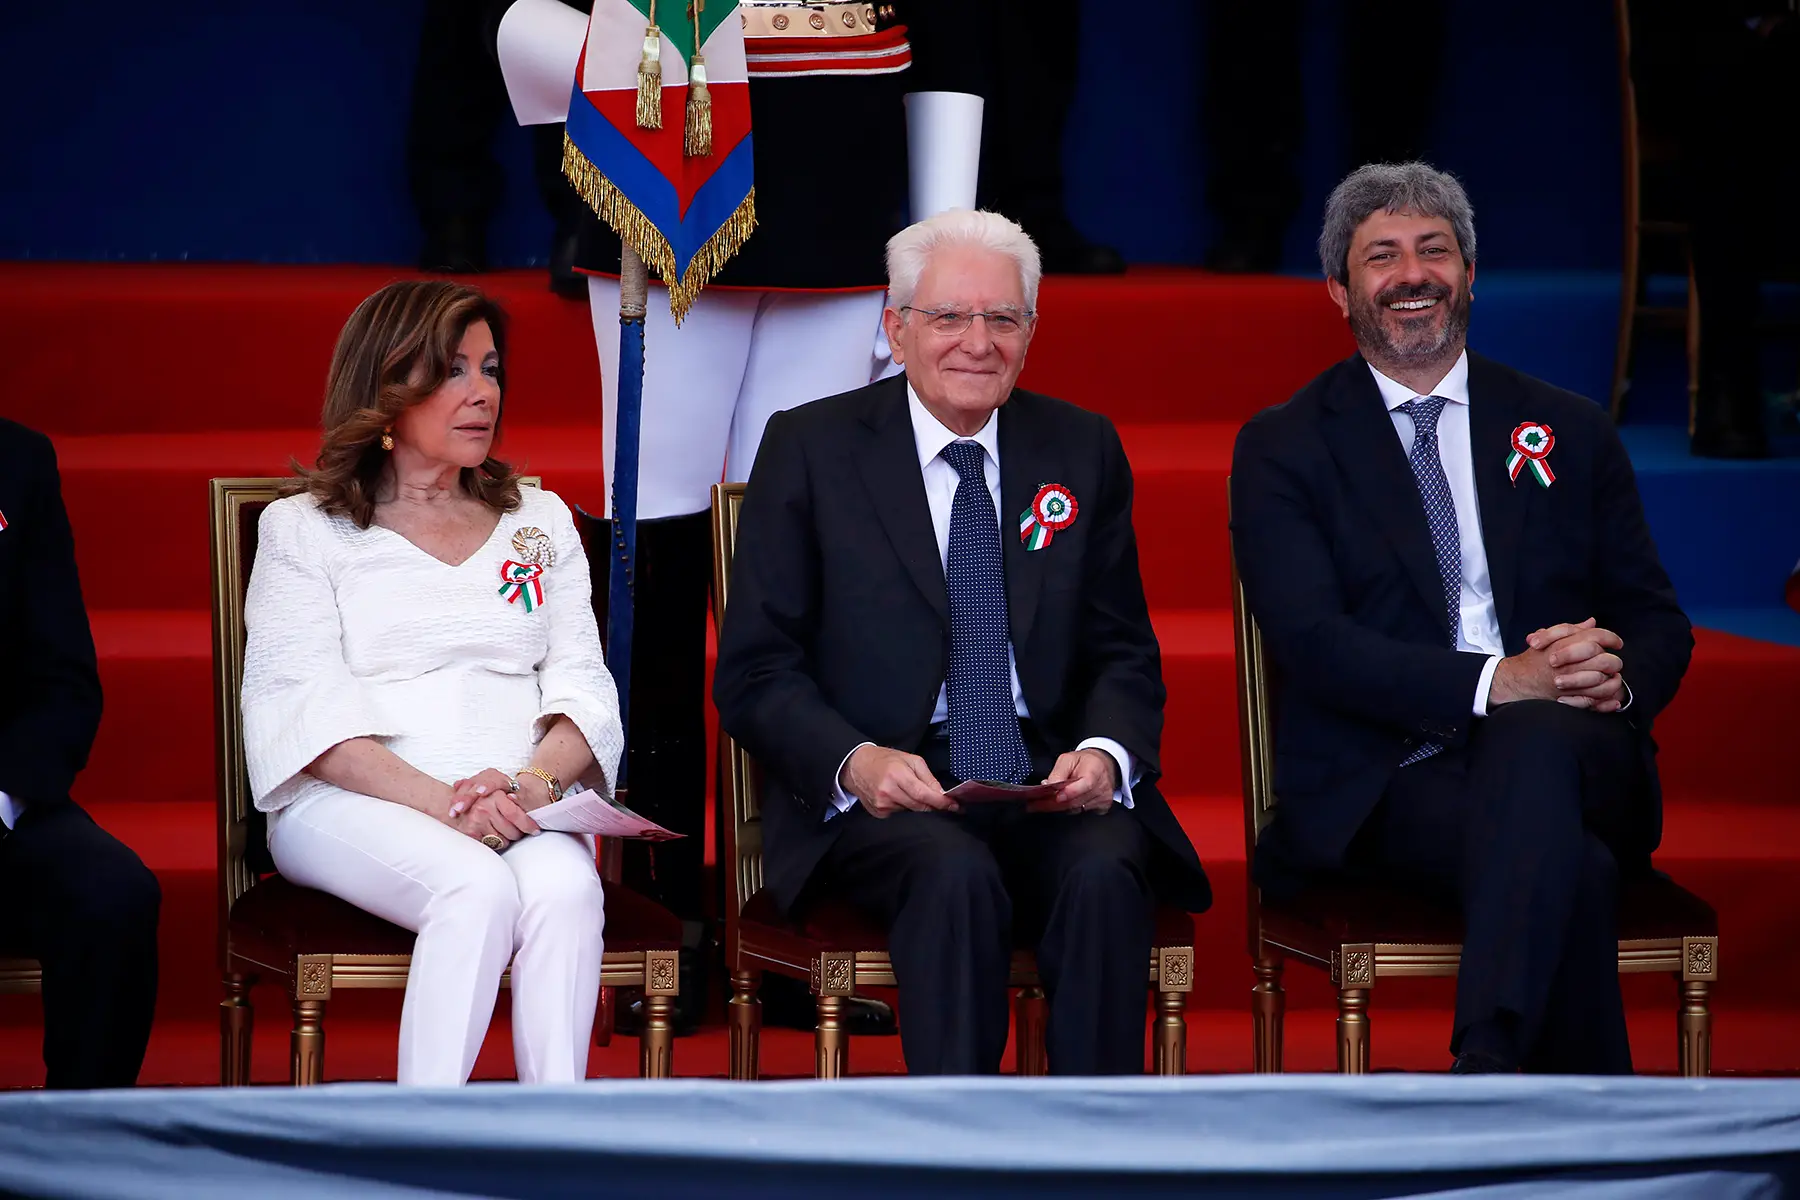 Former President of the Italian Senate Maria Elisabetta Casellati, President of the Republic Sergio Mattarella, and President of the Chamber of Deputies Roberto Fico attending the military parade on the Via dei Fori Imperiali in 2022. All three have small rosettes with the Italian flag on them.